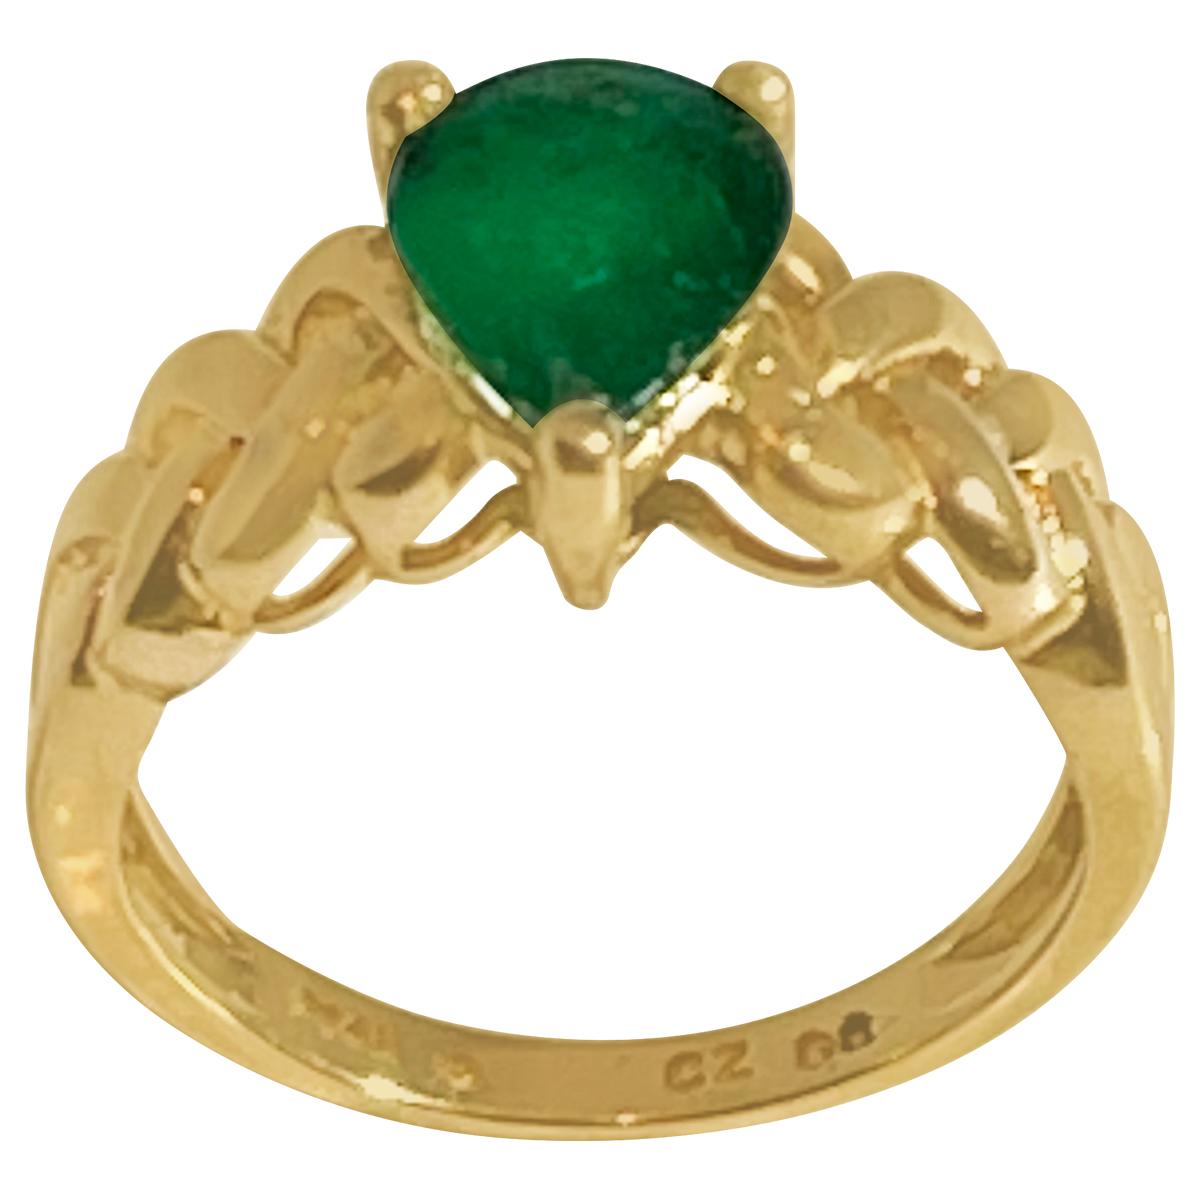 
1.42 Carat Pear Cut Natural Emerald Ring 14 Karat Yellow  Gold Size 5.8
Pear shape  Emerald Ring

 Emeralds are very precious , Very Difficult to find and getting more more difficult to find.
A classic, Cocktail ring 
 Emerald measurements